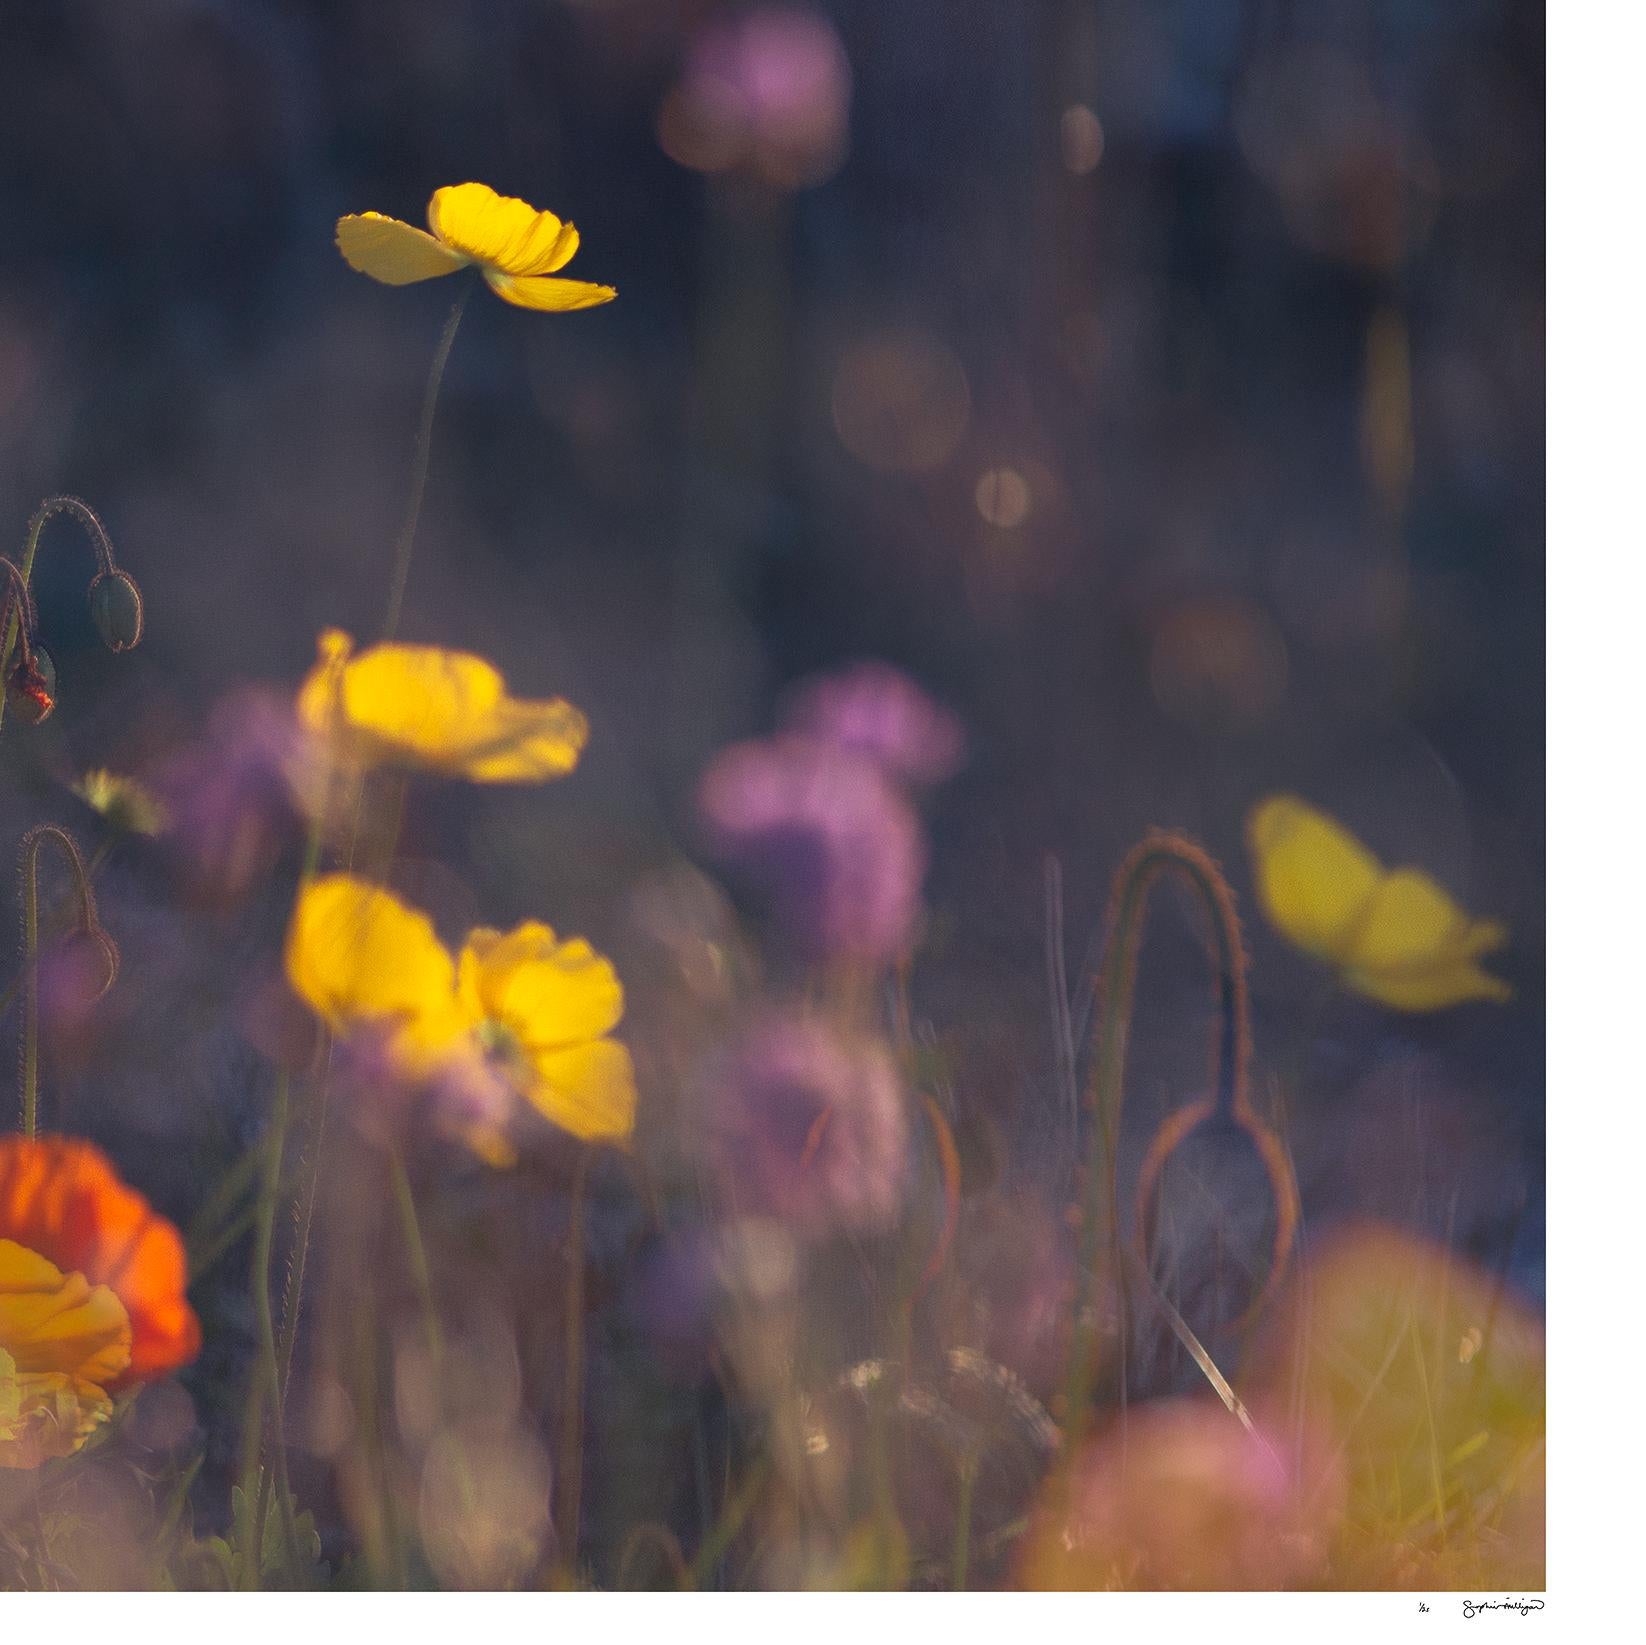 'Evening Poppies' ('Mono No Aware' Series)
Limited edition archival photograph. Unframed, hand signed and numbered
_________________
Buds, blooms, and the fading glories of Icelandic poppies capture the glow of the evening sun. Woven together into